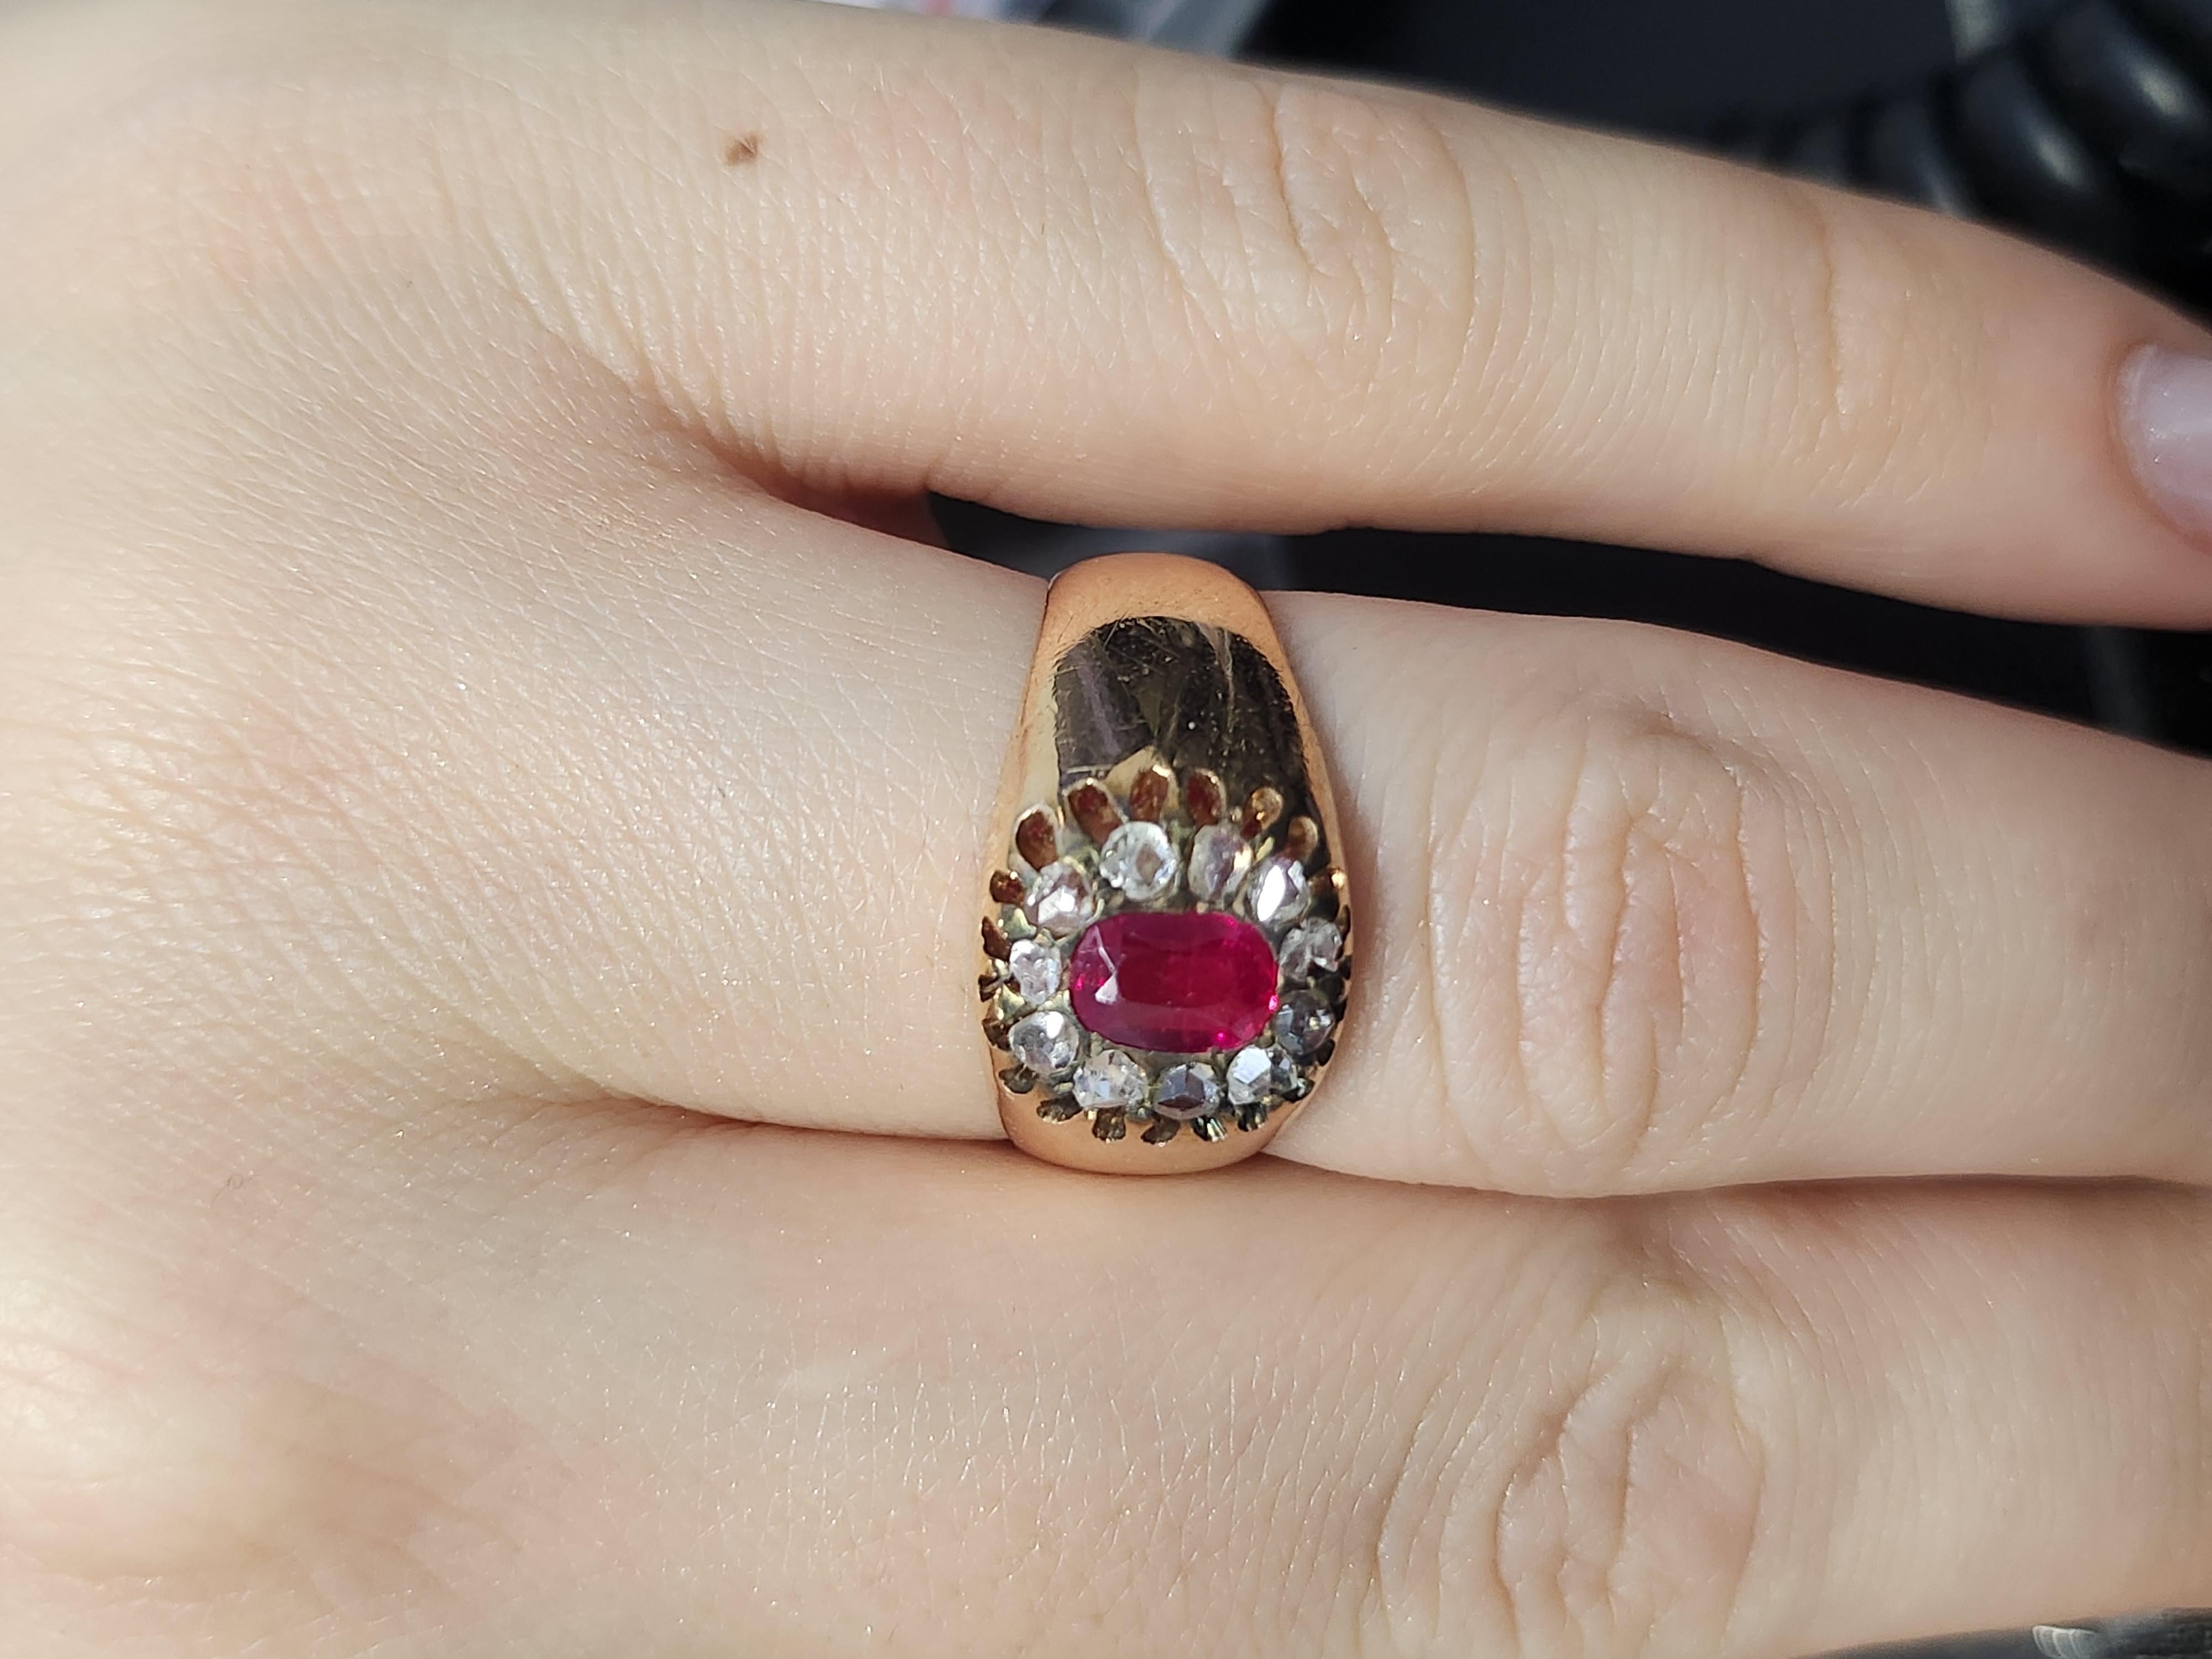 Antique 14k heavy rose gold colour ring centeted with 1 oval ruby stone flanked with rose cut diamonds in fine prongs ring is hall markes 56 gold standard and initial maker mark in cyrllic alphabet